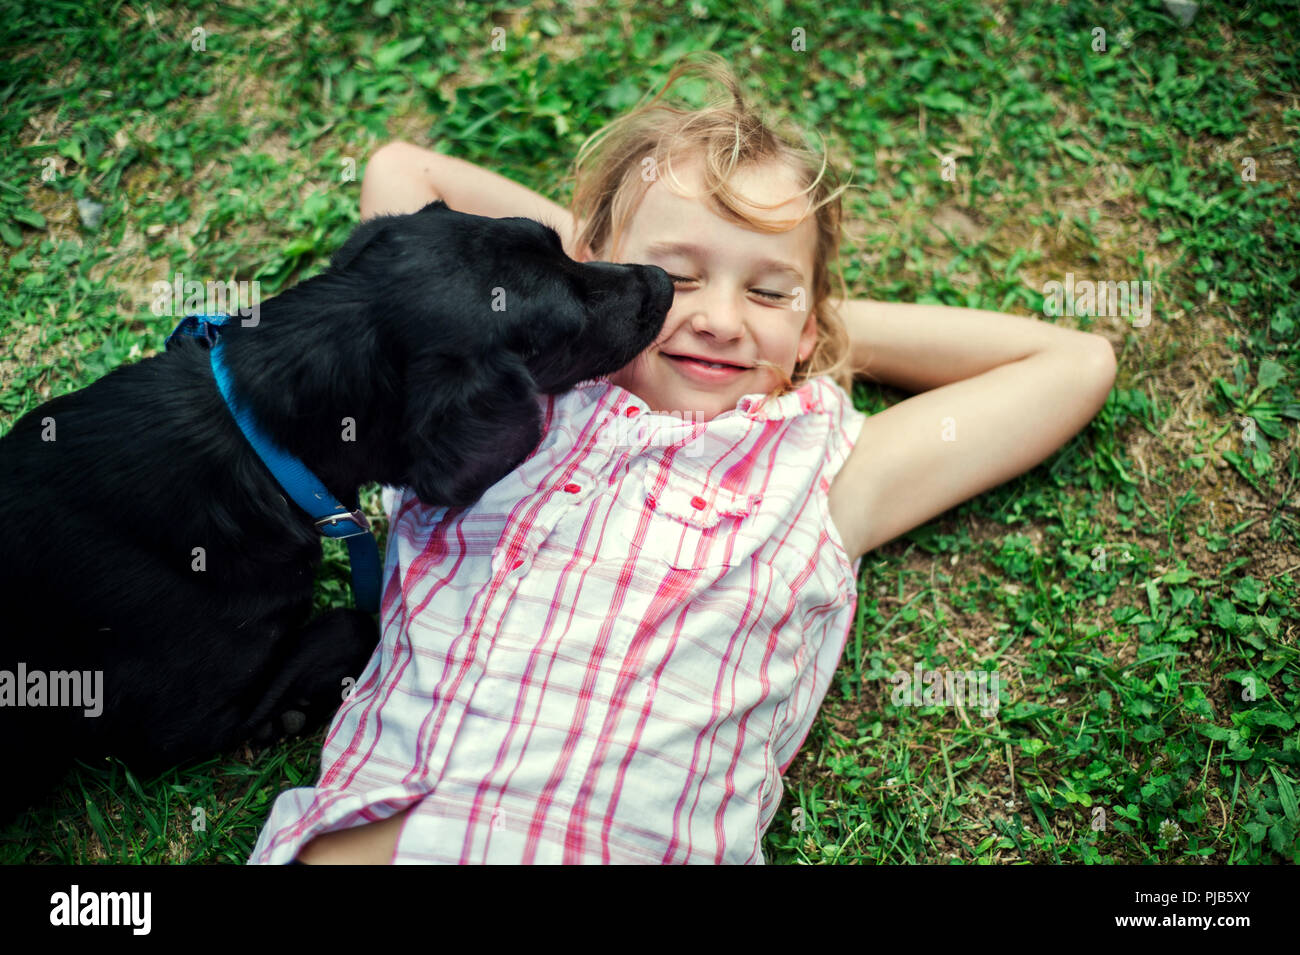 A small girl lying down on grass, a black dog licking her face. Stock Photo